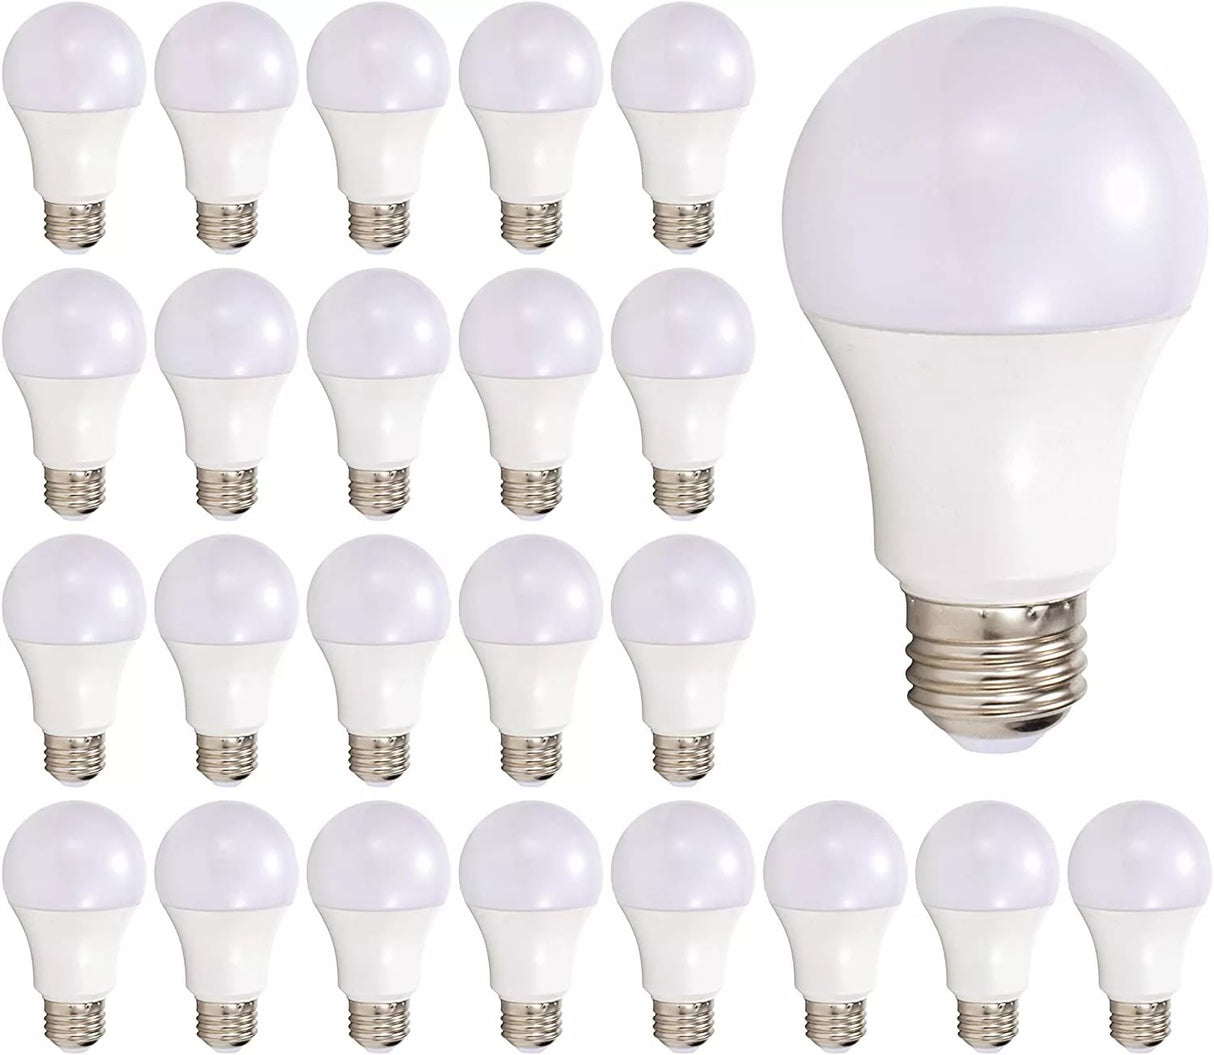 60-Watt Equivalence Non-Dimmable A19 LED Light Bulb in Daylight 5000K (24-Pack)